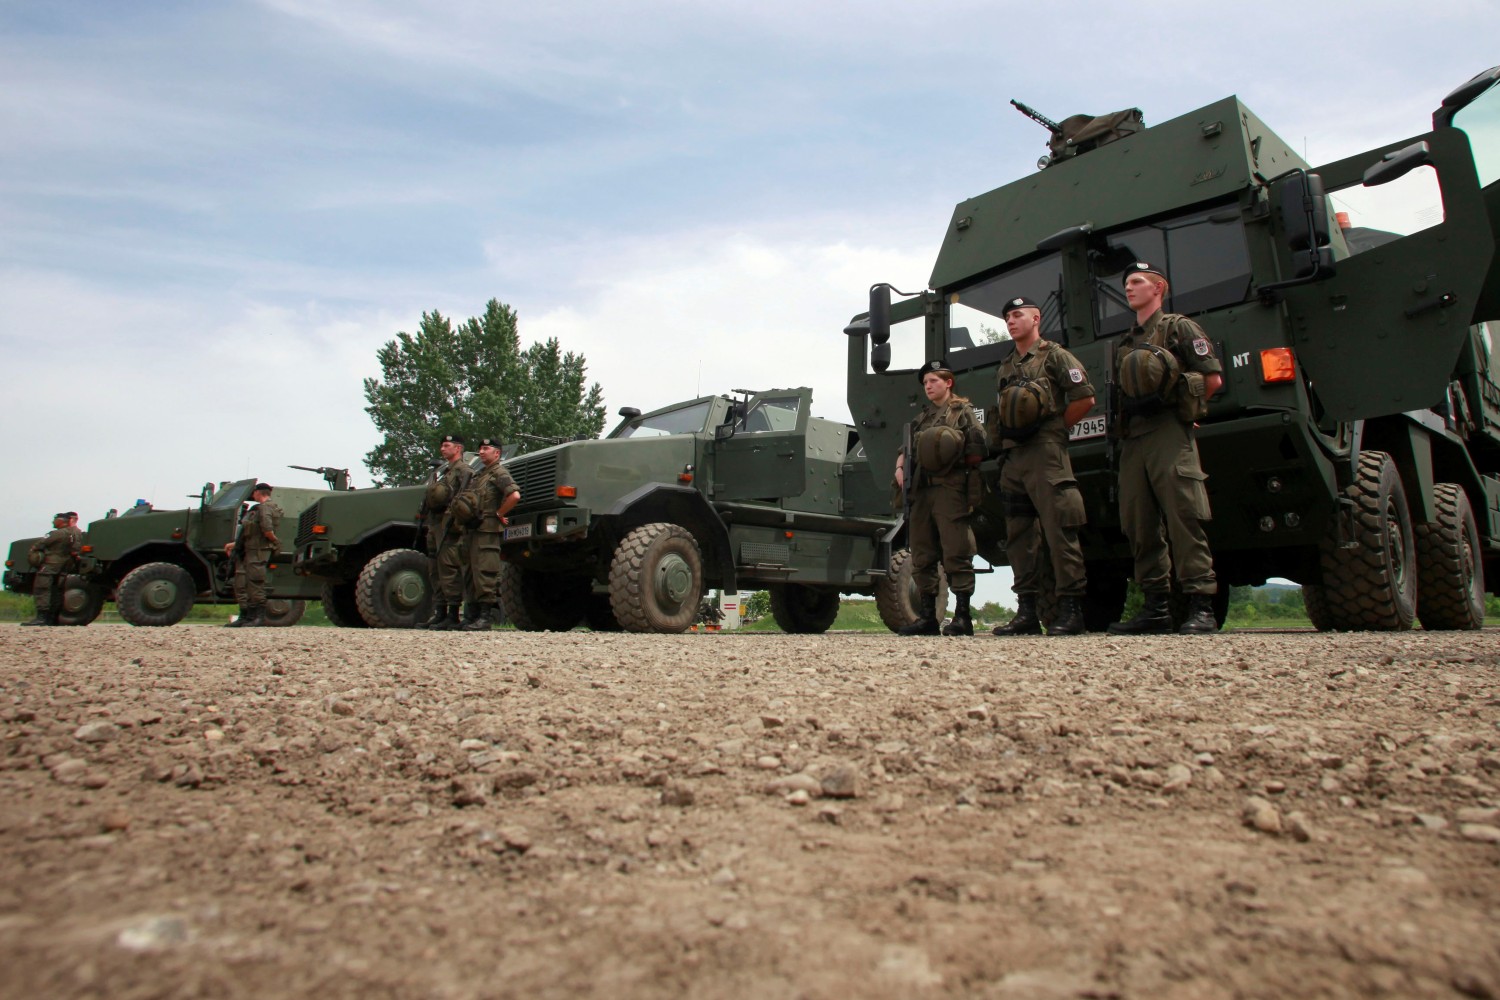 Members of the EU-Battlegroup wait for Austrian Defence Minister Norbert Darabos as he visits their barracks in Mautern about 60 kilometres (38miles) west of Vienna May 11, 2012. Reuters/Leonhard Foeger/File Photo